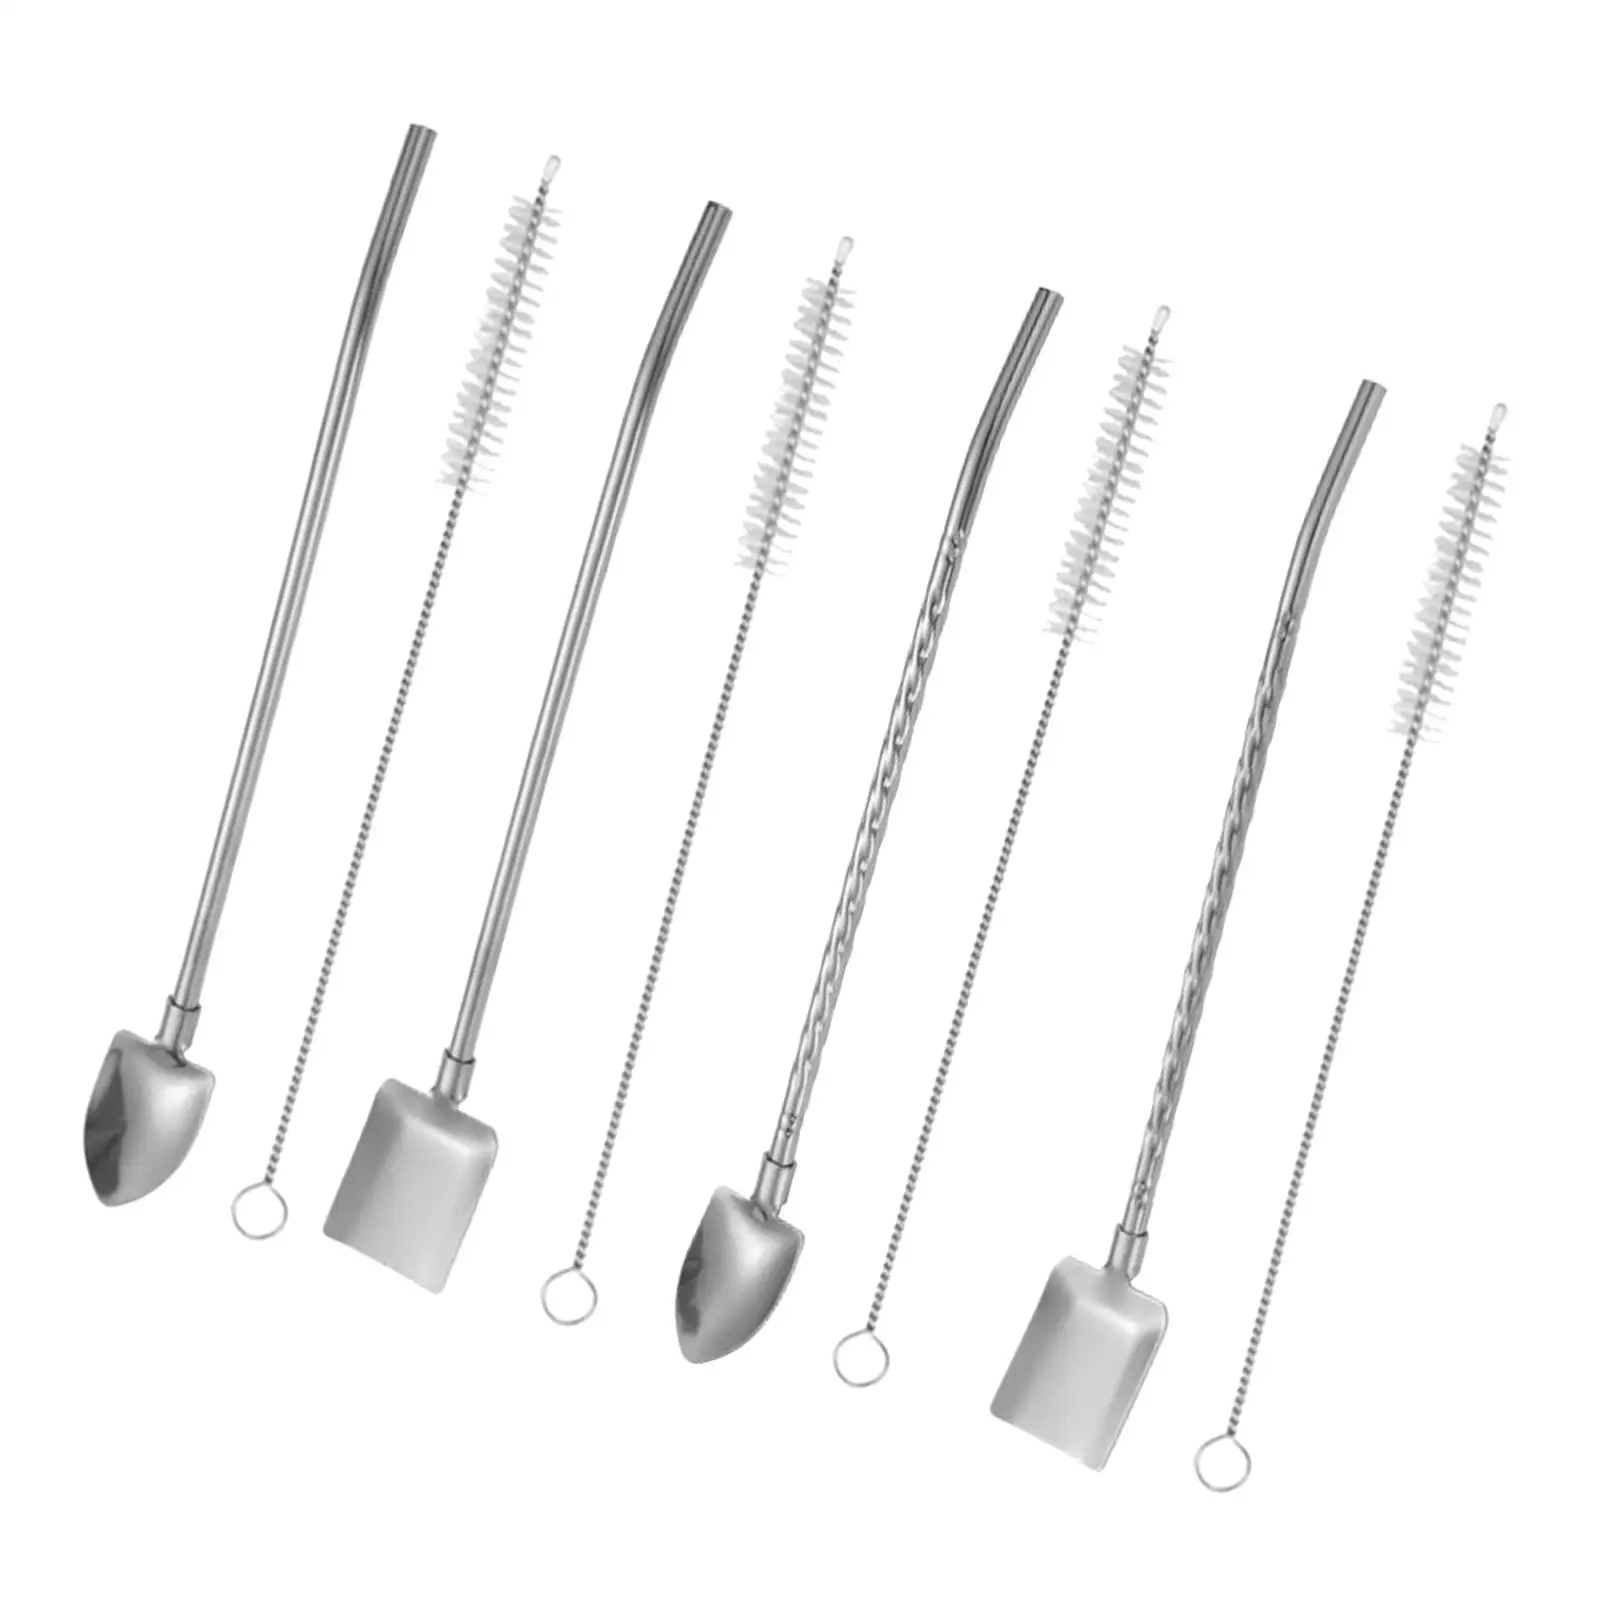 Reusable Spoon Mixing Stirring Spoon with Cleaning Brush Drinking Straw Drinking Stirring Spoons Straw for Tea Juice Ice Cream